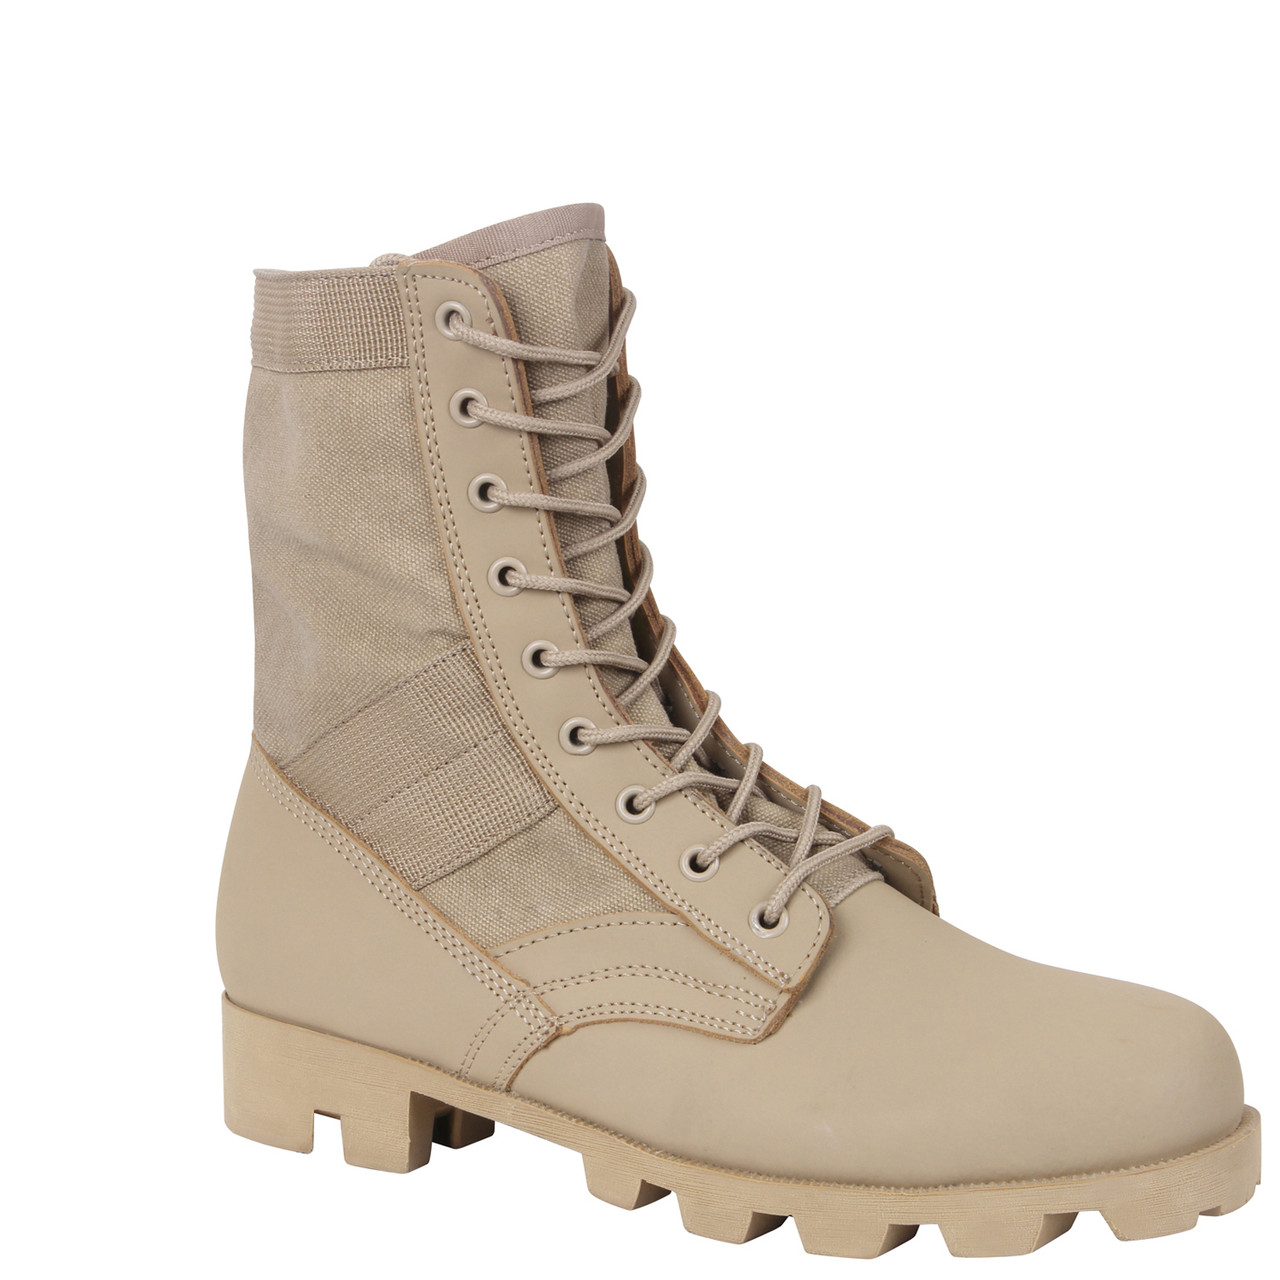 Rothco Classic Military Jungle Boots 